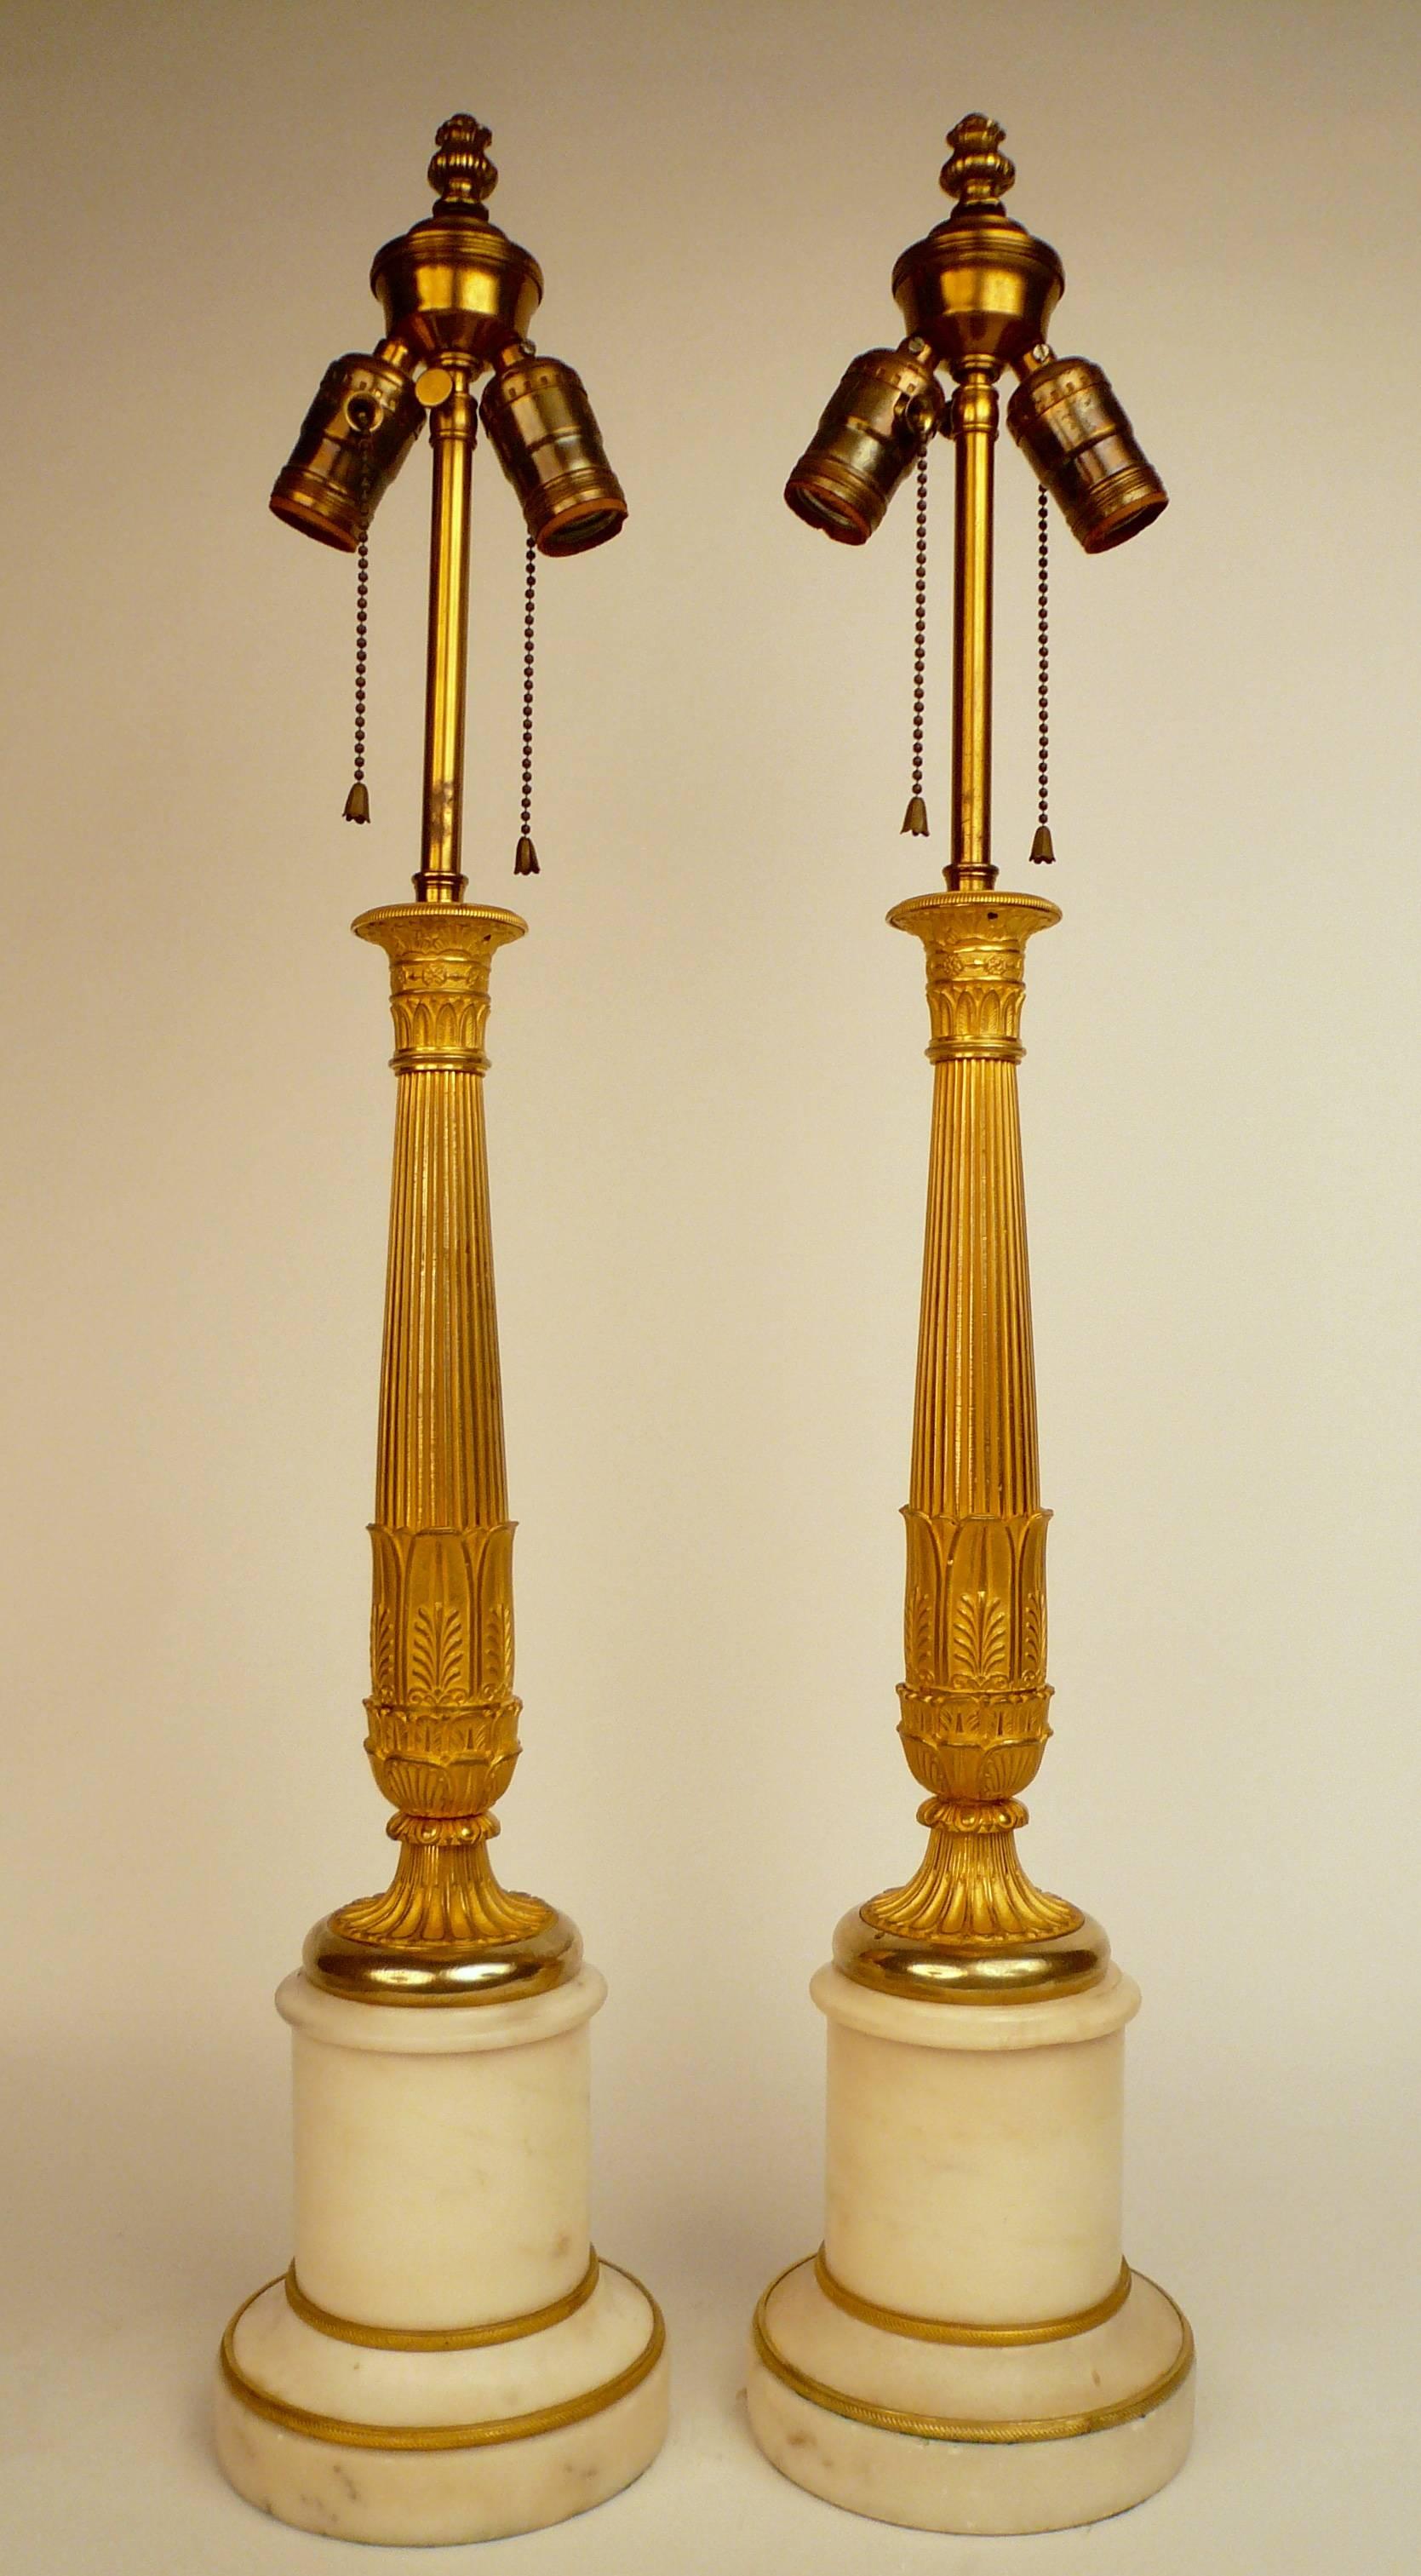 Neoclassical Pair 19th Century French Empire Ormolu and Marble Columnar Form Lamp Bases